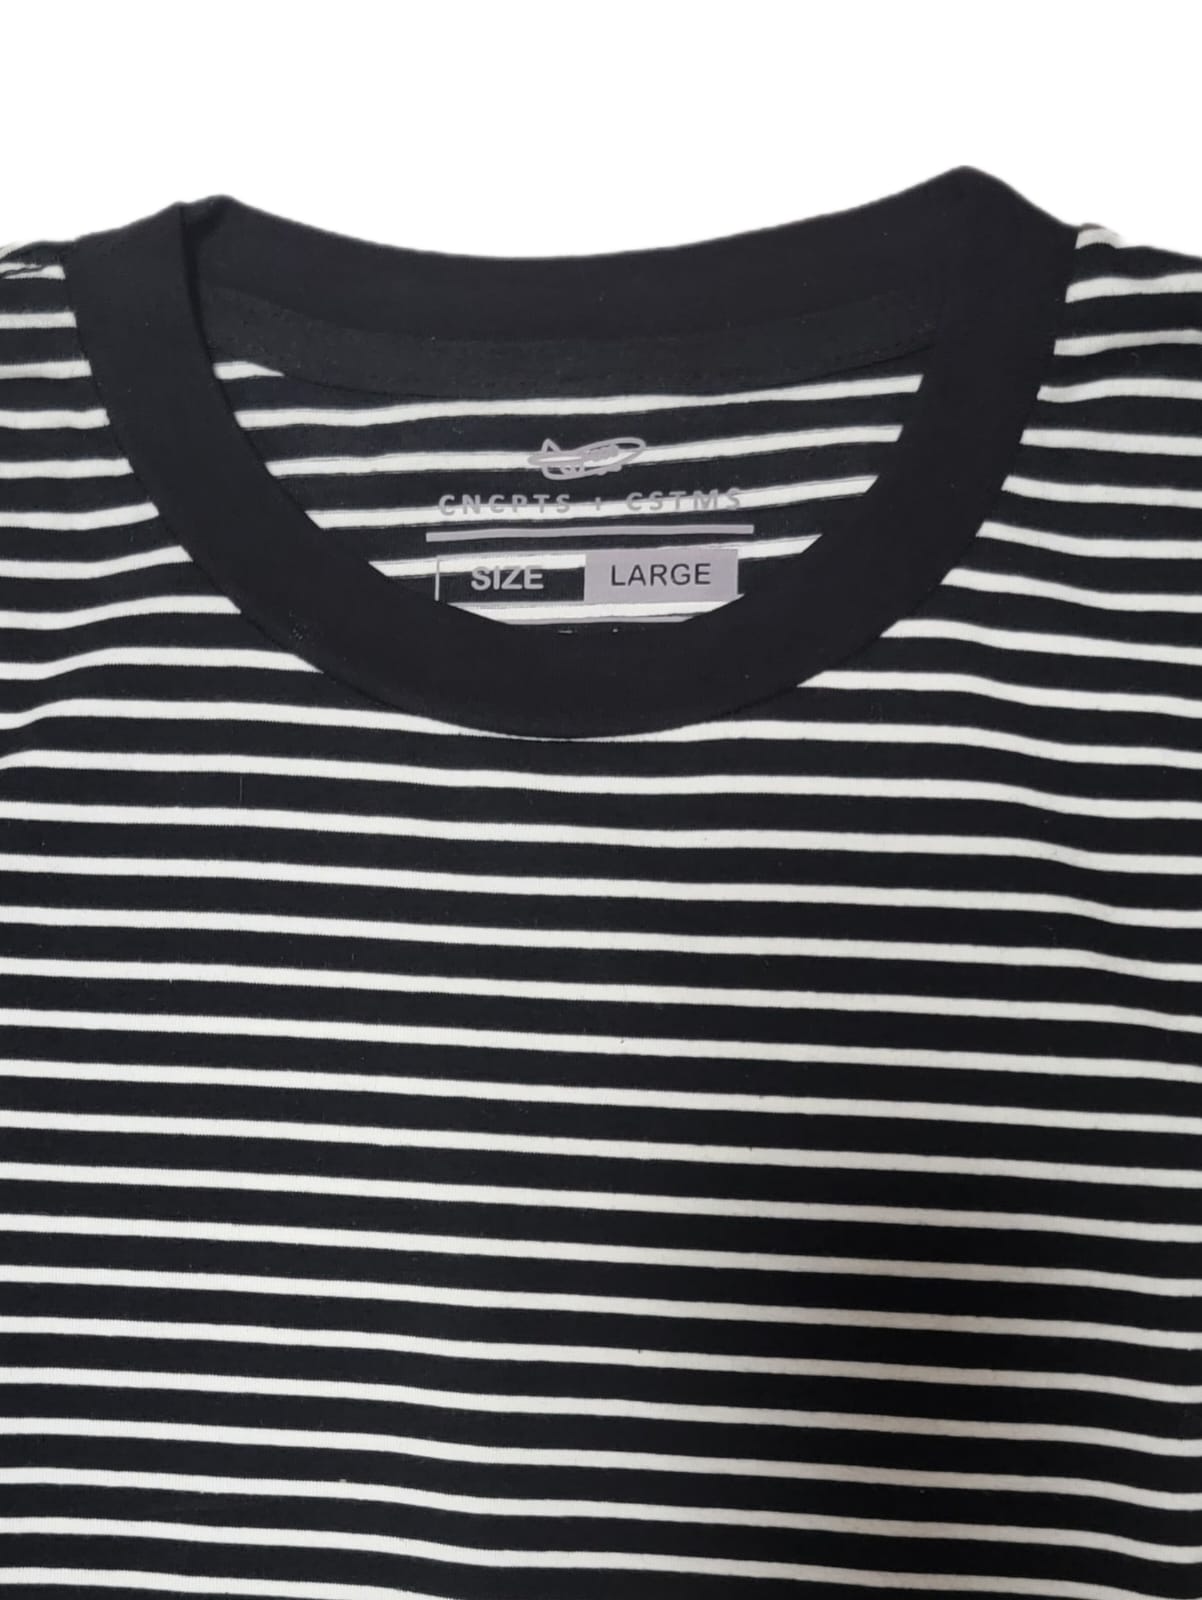 Official Stripe Tee